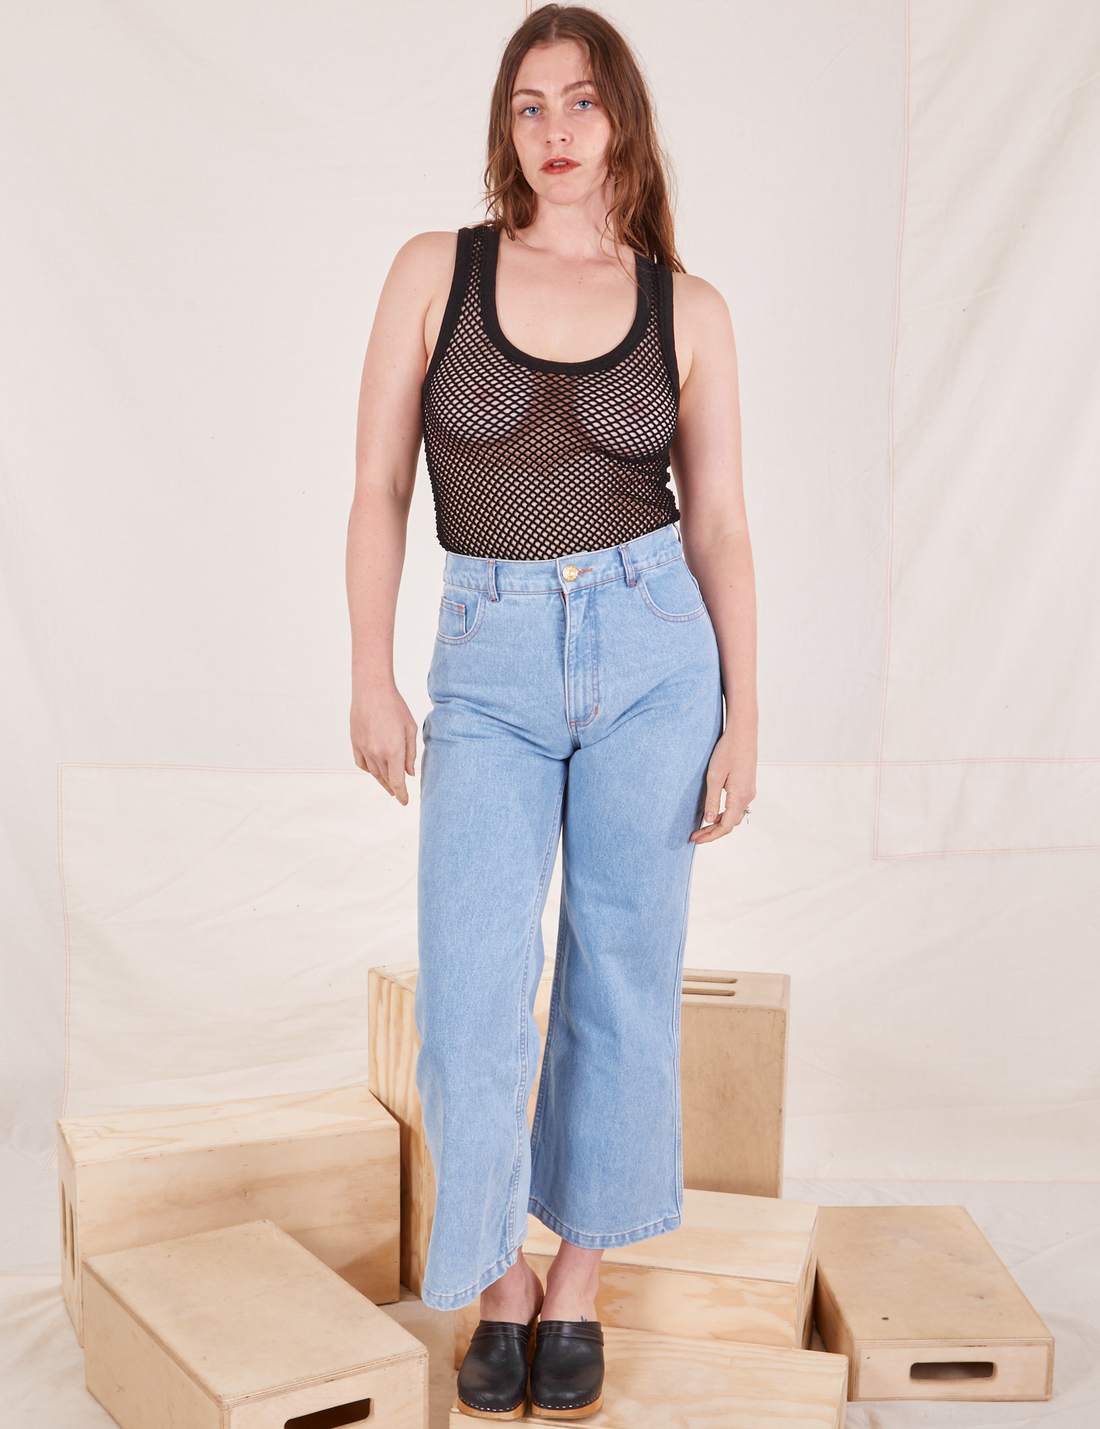 Allison is 5'10 and wearing XXS Mesh Tank Top in Basic Black paired with light wash Sailor Jeans